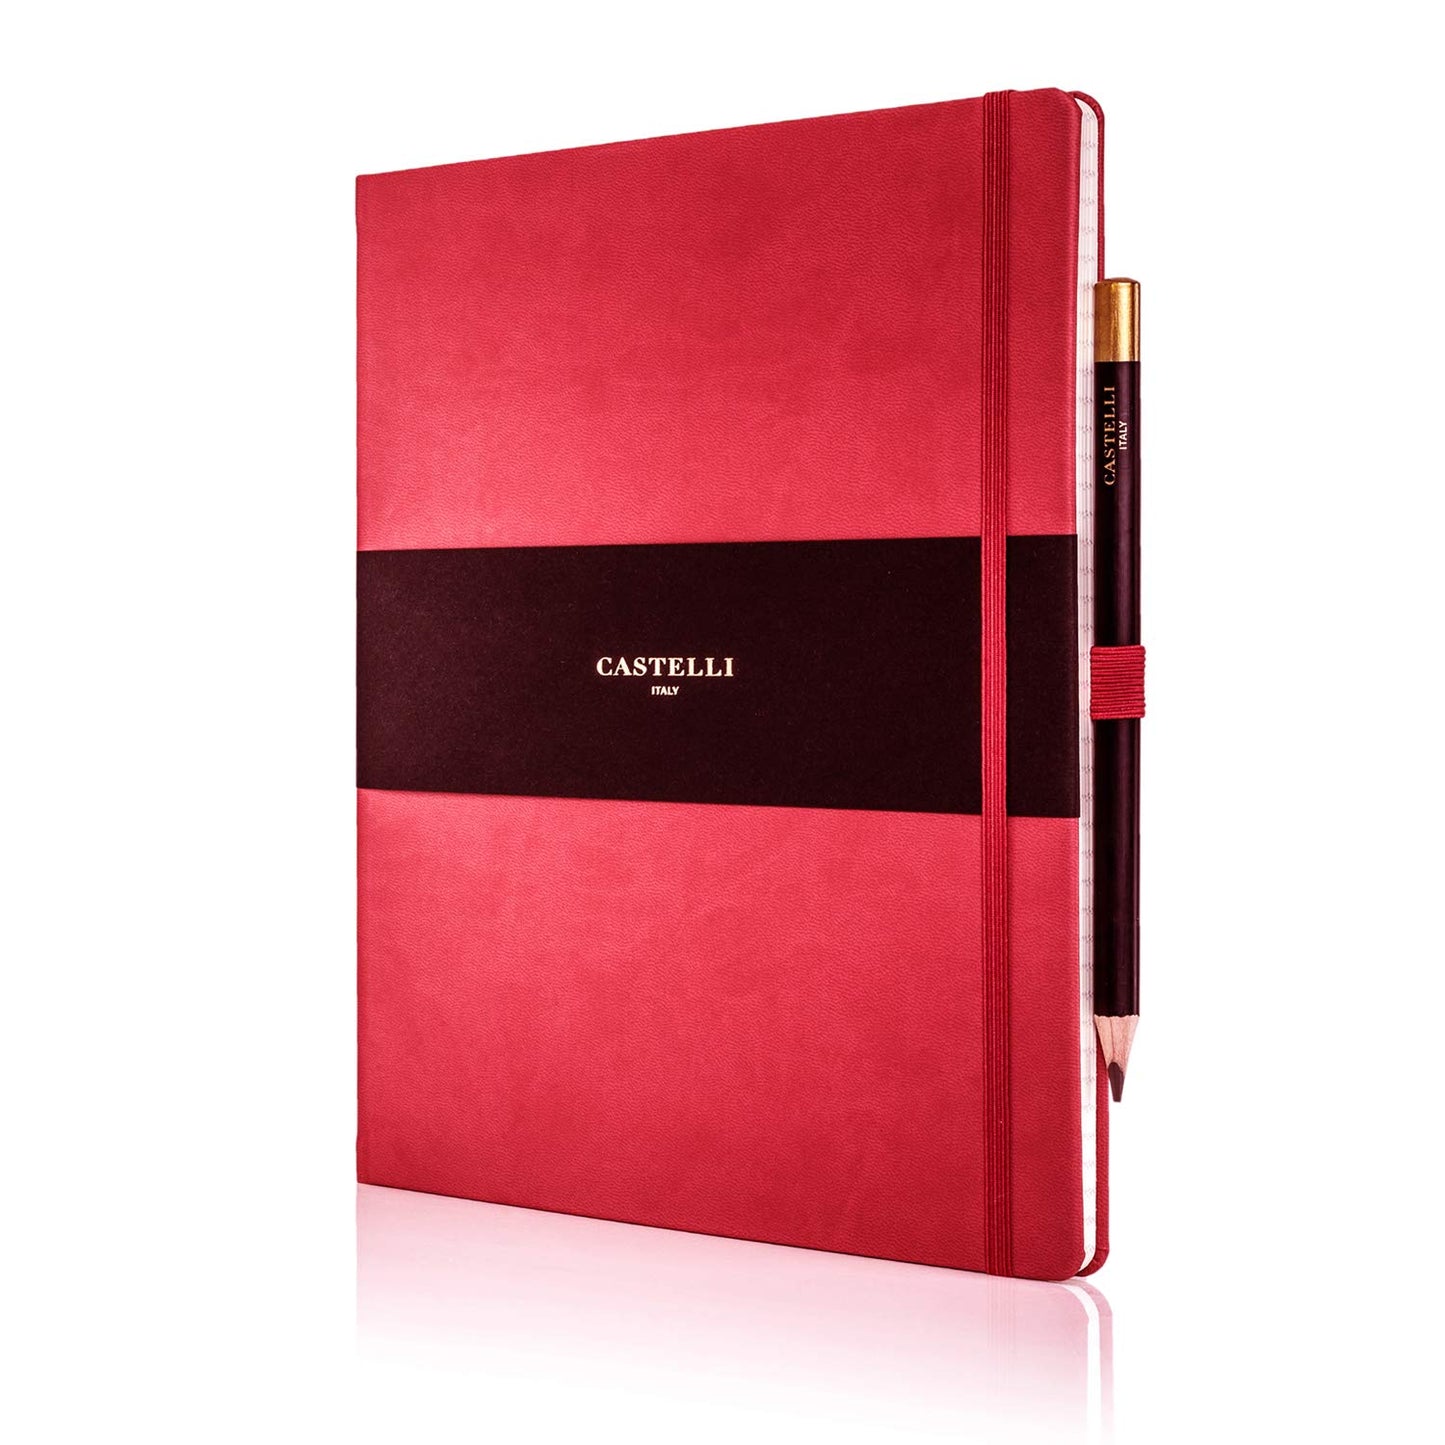 Custom Book | Promotional Quality | 10 by 8 Inches | Scarlet Red Colour | Smooth, Soft Artificial Leather Cover | Lined Pages | Ribbon Marker